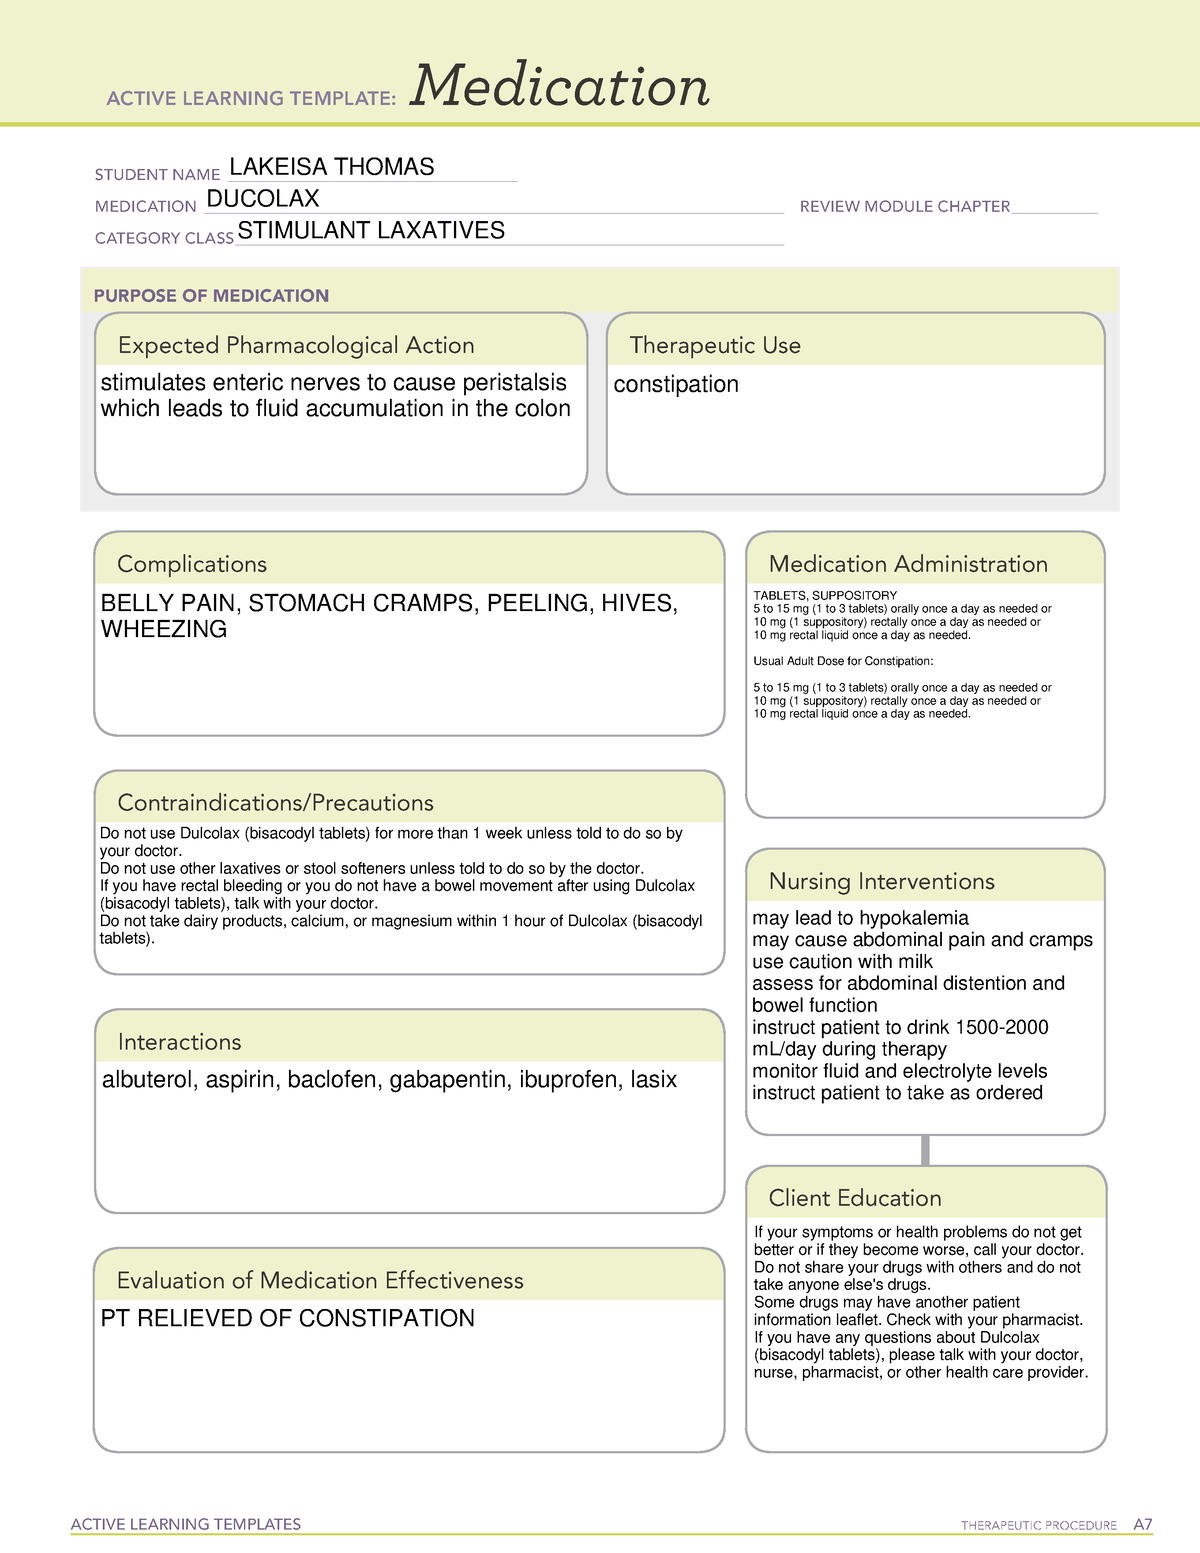 stimulant-laxatives-drug-card-active-learning-templates-therapeutic